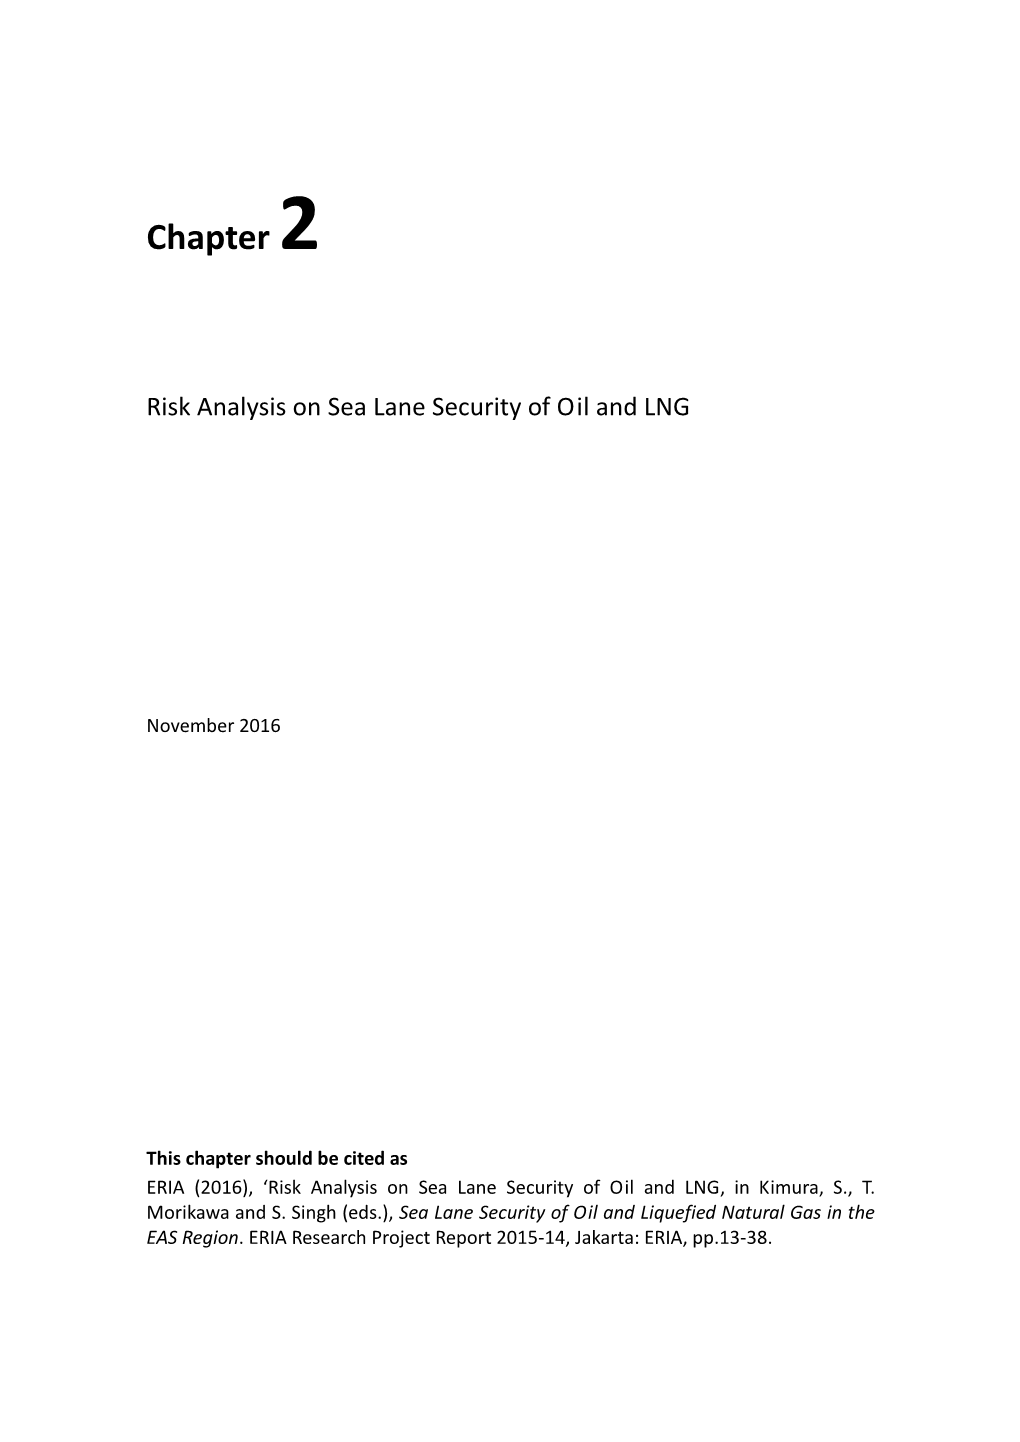 Chapter 2 Risk Analysis on Sea Lane Security of Oil And